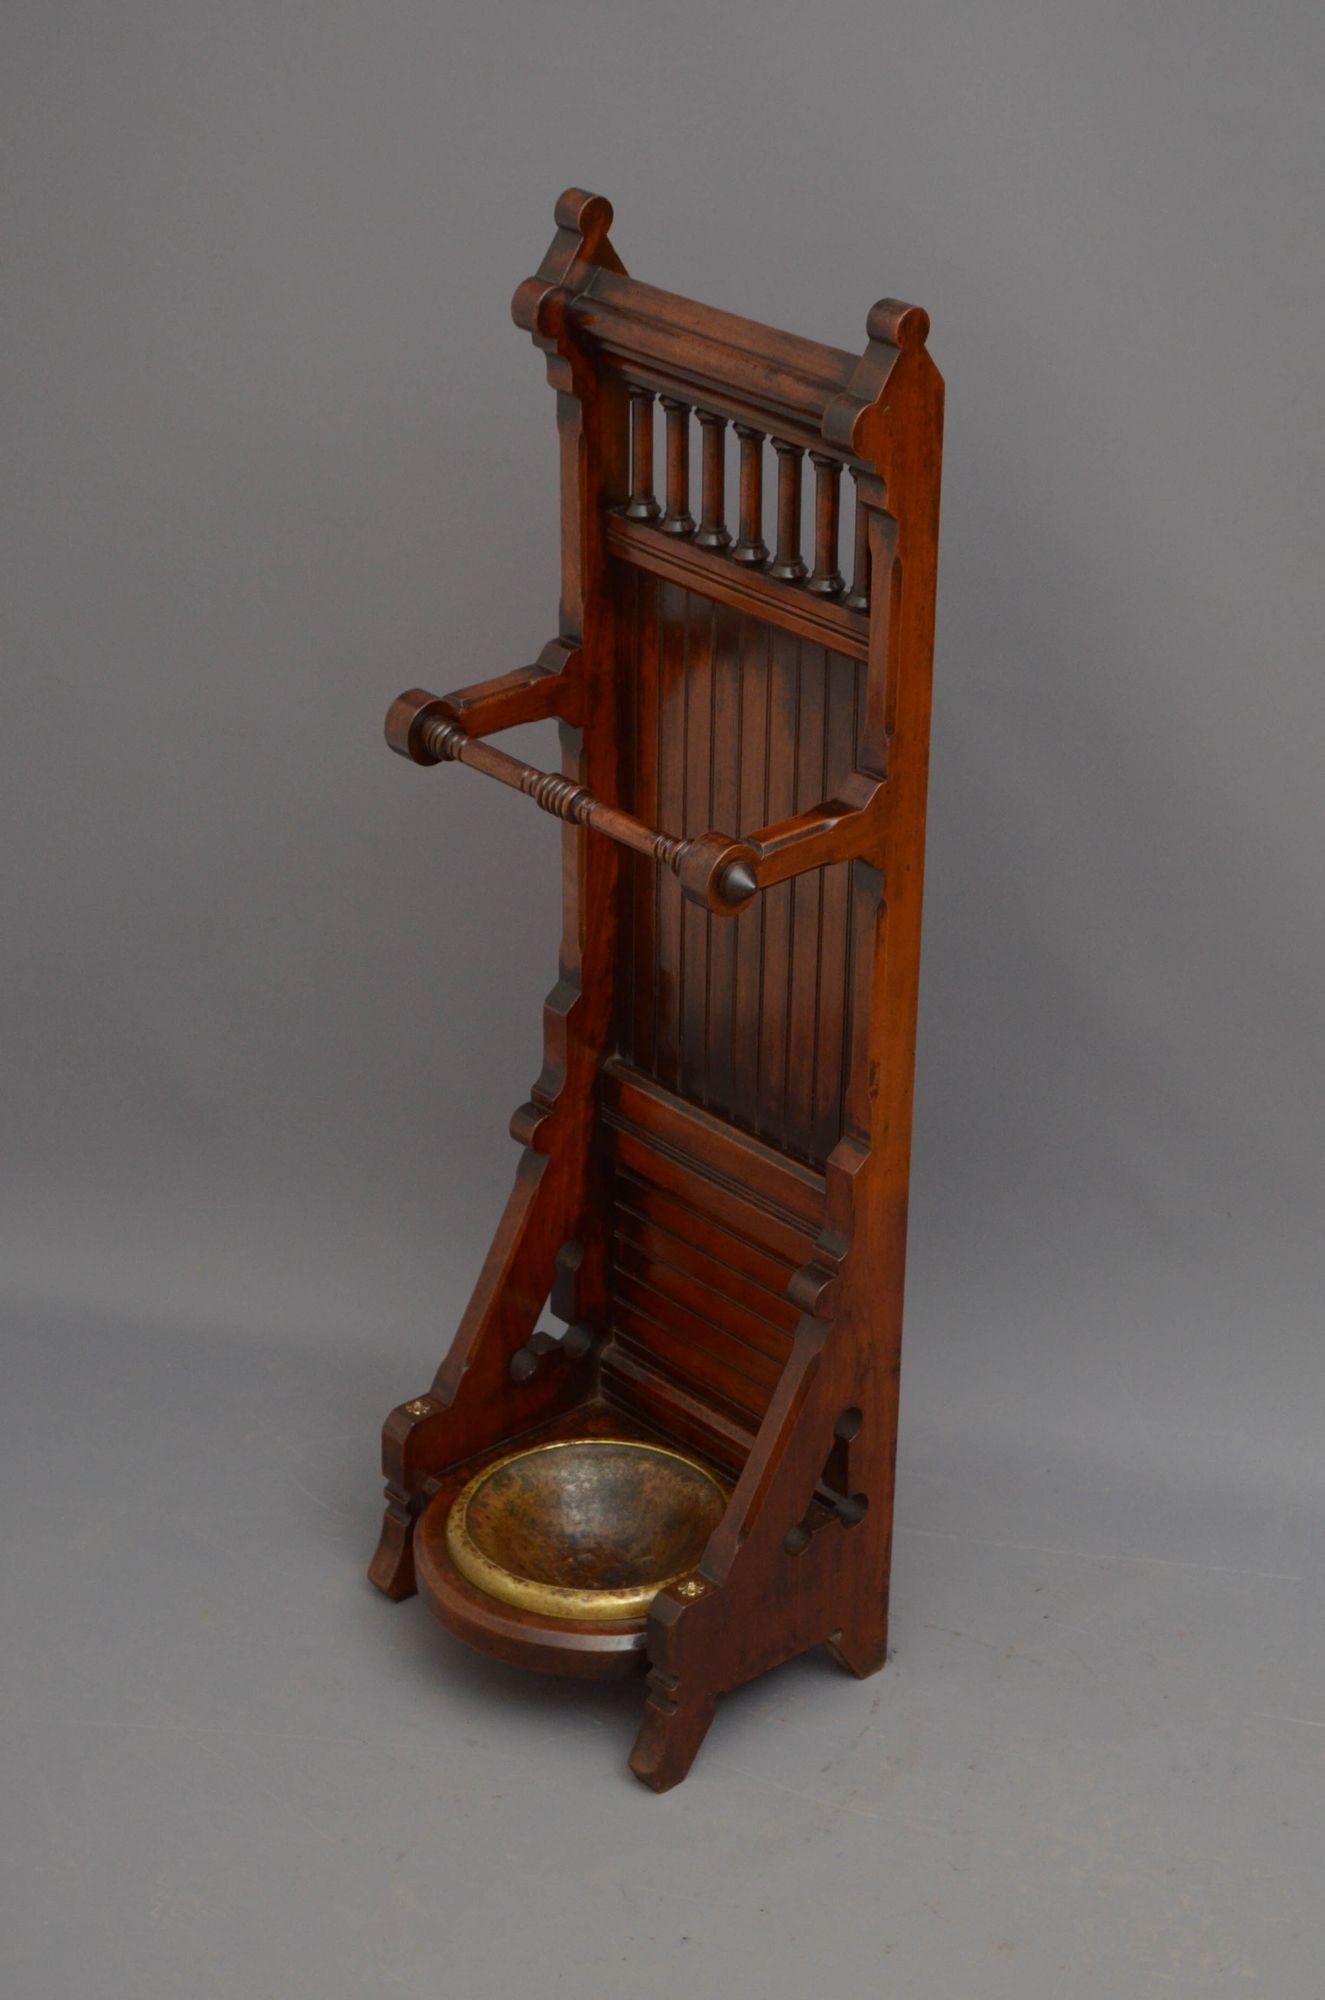 Sn5513 Stylish Victorian umbrella stand in mahogany, having turned and ringed umbrella holder with panelled backing and spindled gallery to the top, the base having Gothic carvings and encloses original drip tray, all in home ready condition.